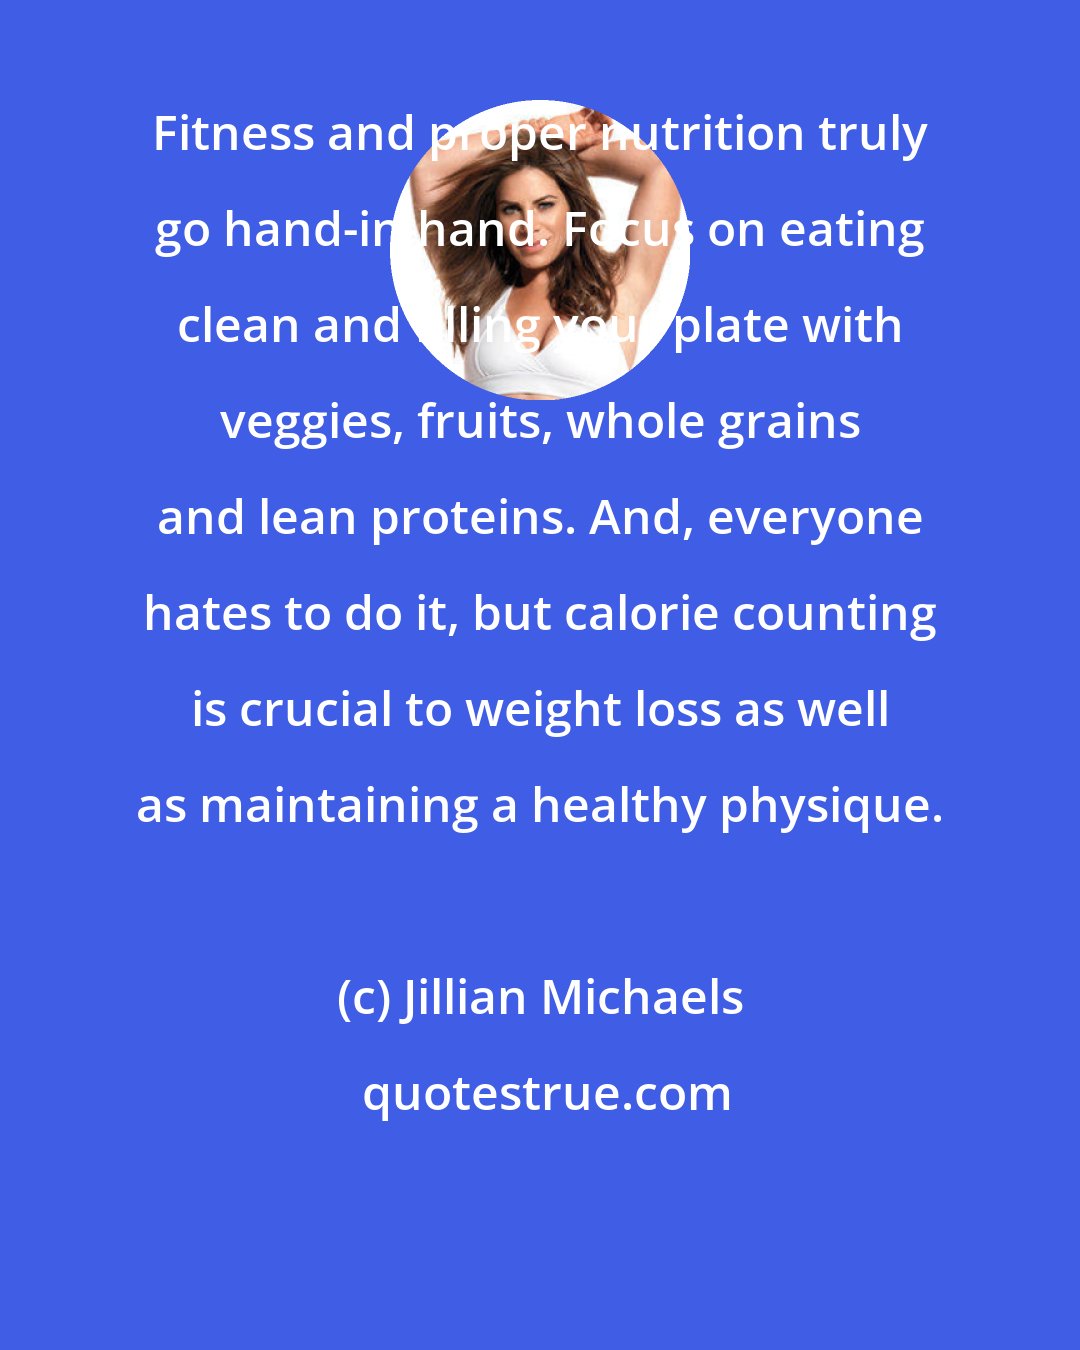 Jillian Michaels: Fitness and proper nutrition truly go hand-in-hand. Focus on eating clean and filling your plate with veggies, fruits, whole grains and lean proteins. And, everyone hates to do it, but calorie counting is crucial to weight loss as well as maintaining a healthy physique.